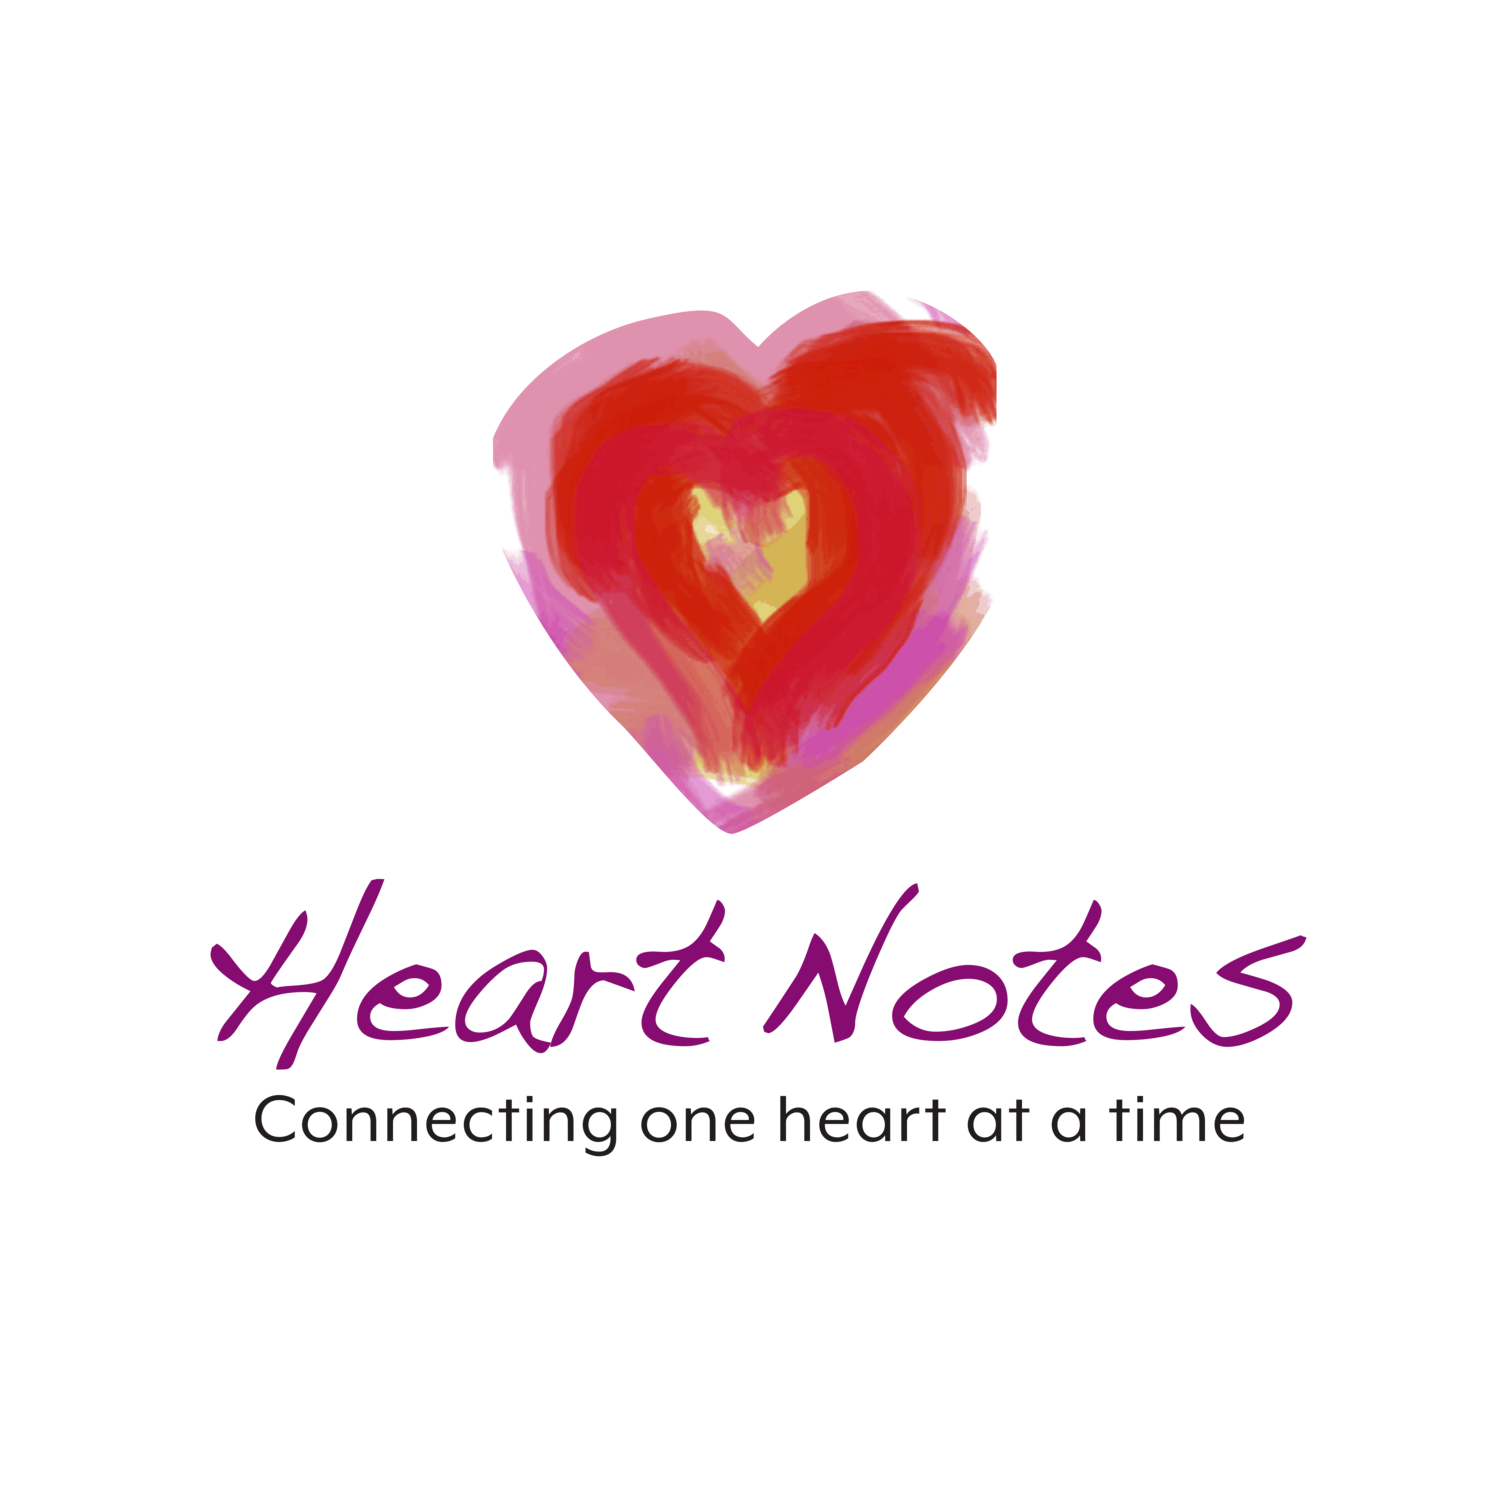 A Heart Note